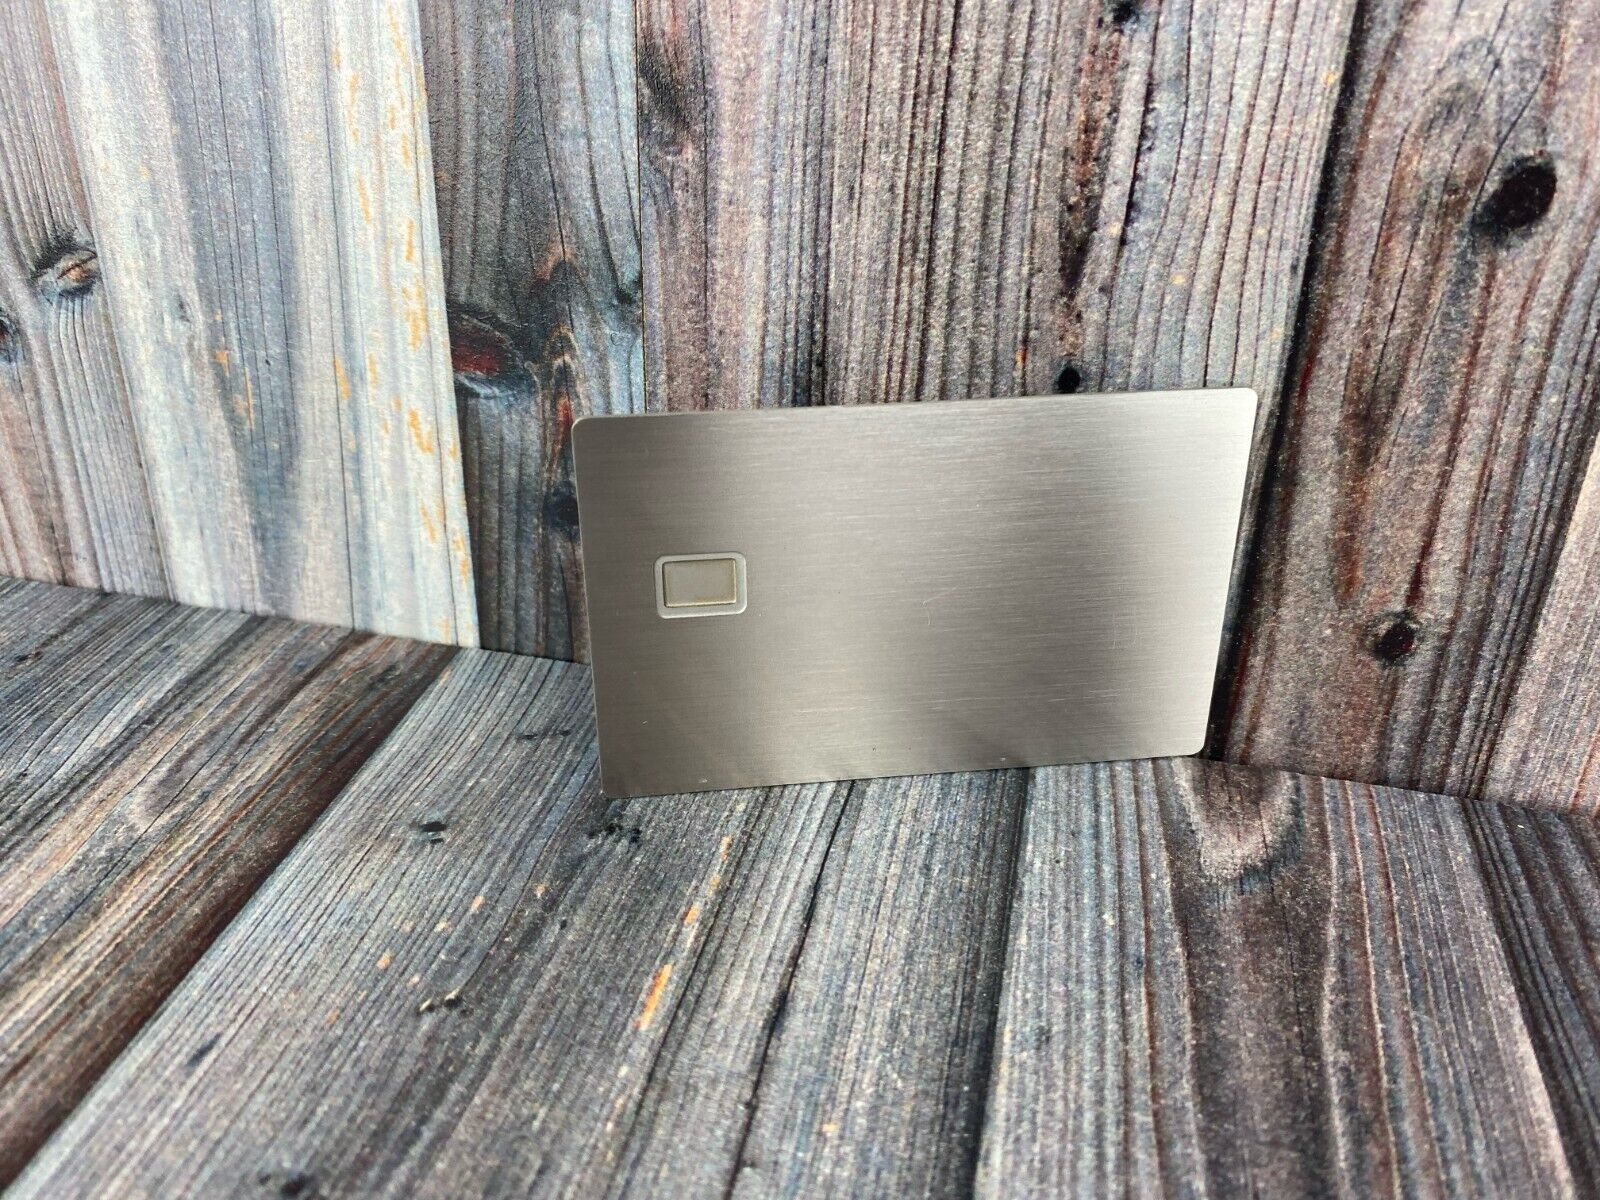 Brushed silver / Stainless Steel Credit Card Blank w/ Chip Slot Mag Strip Black